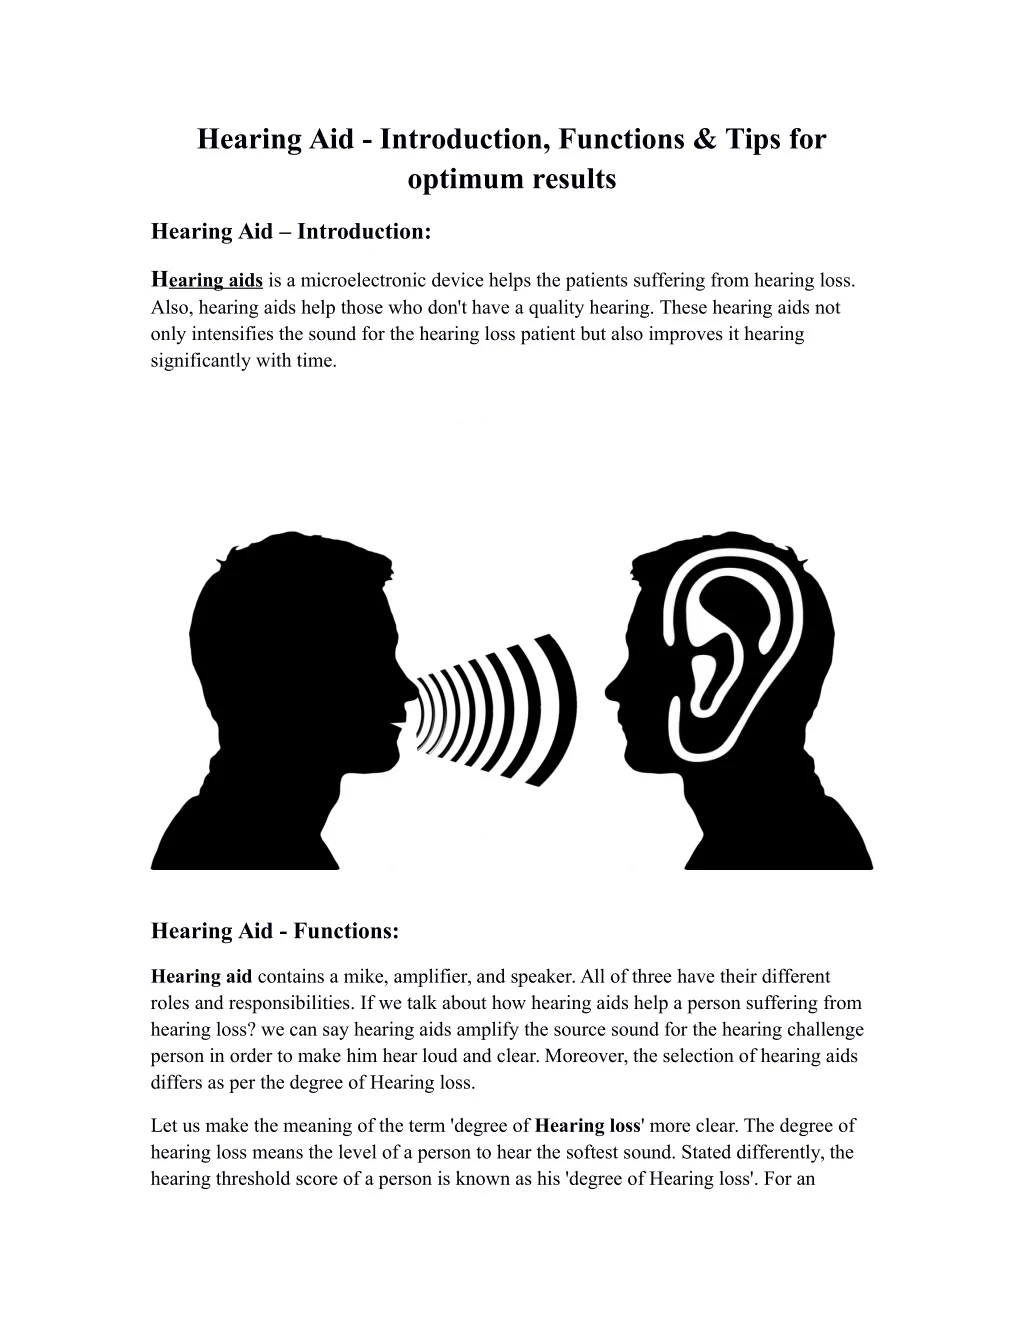 hearing aid introduction functions tips